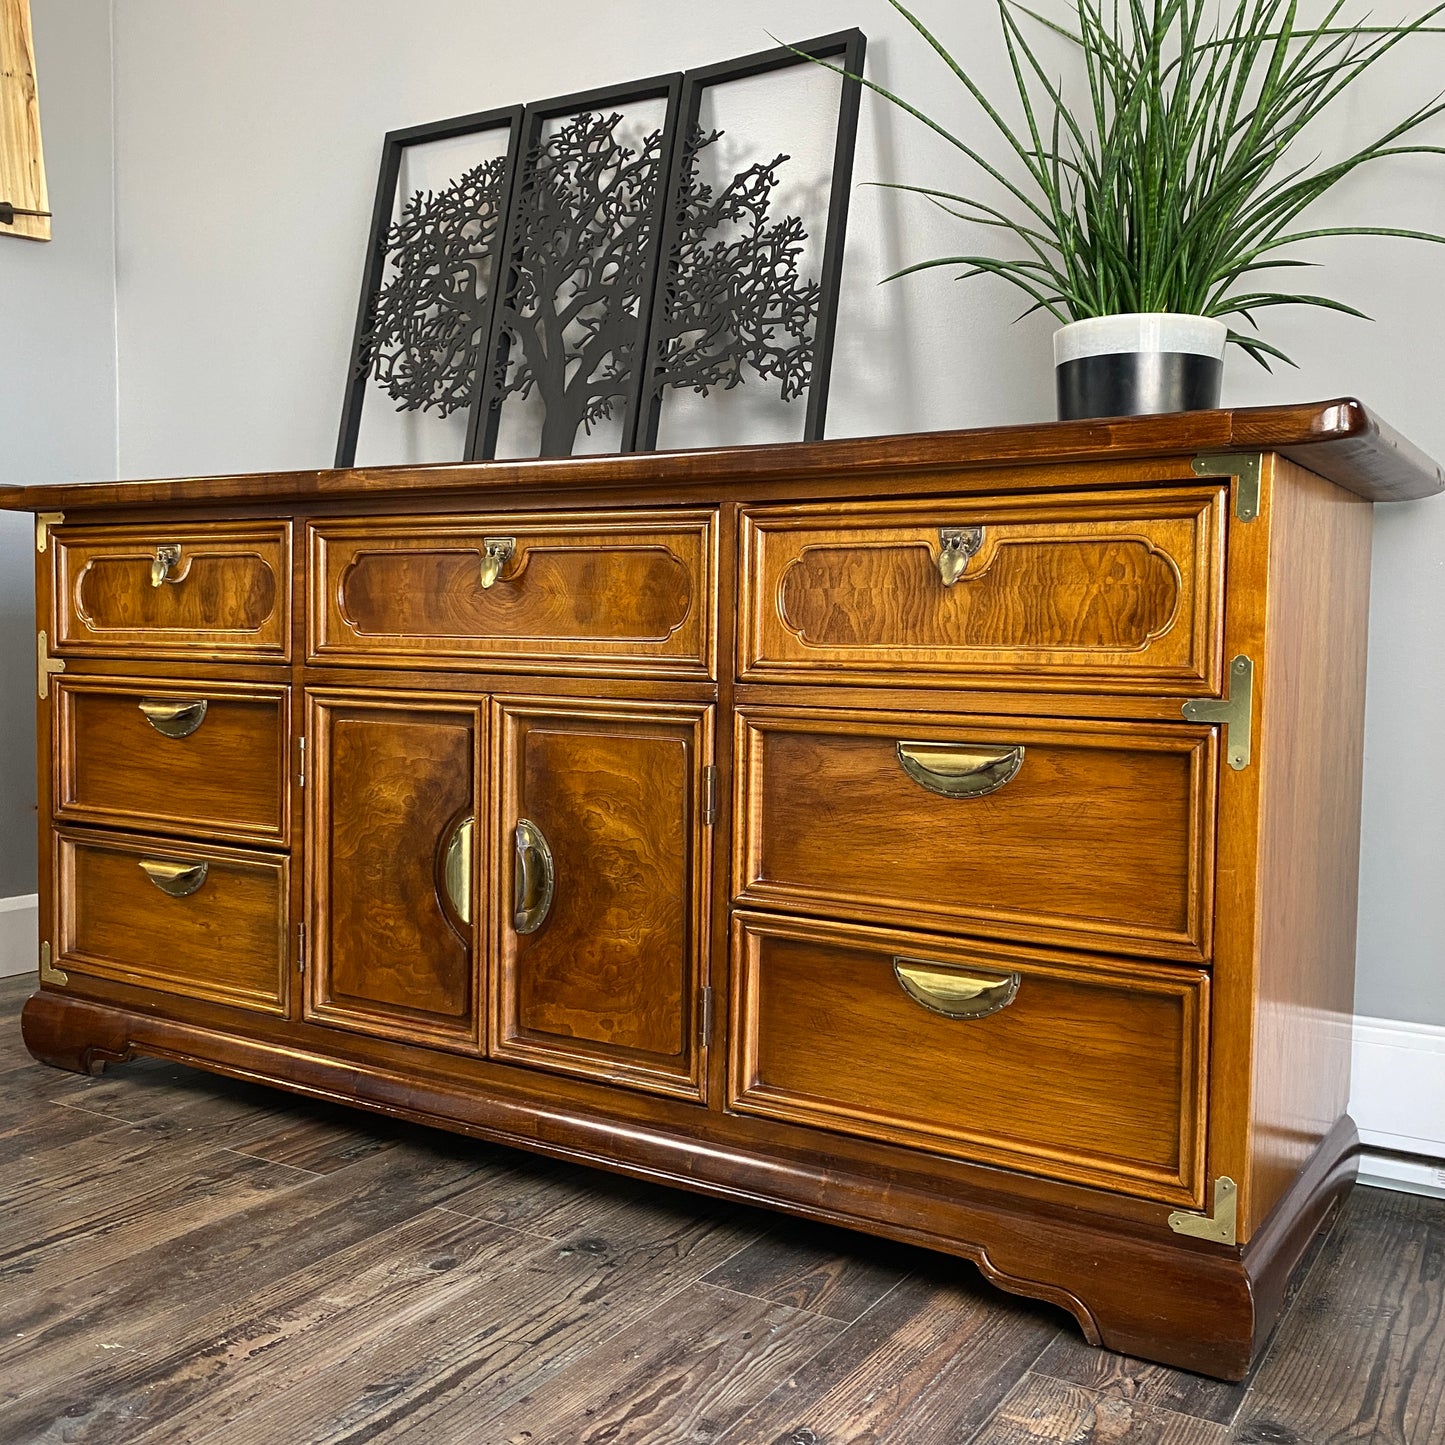 Dresser 7 Drawers Regency Chinoiserie Style Solid Wood Buffet Credenza by Vaughan of Virginia